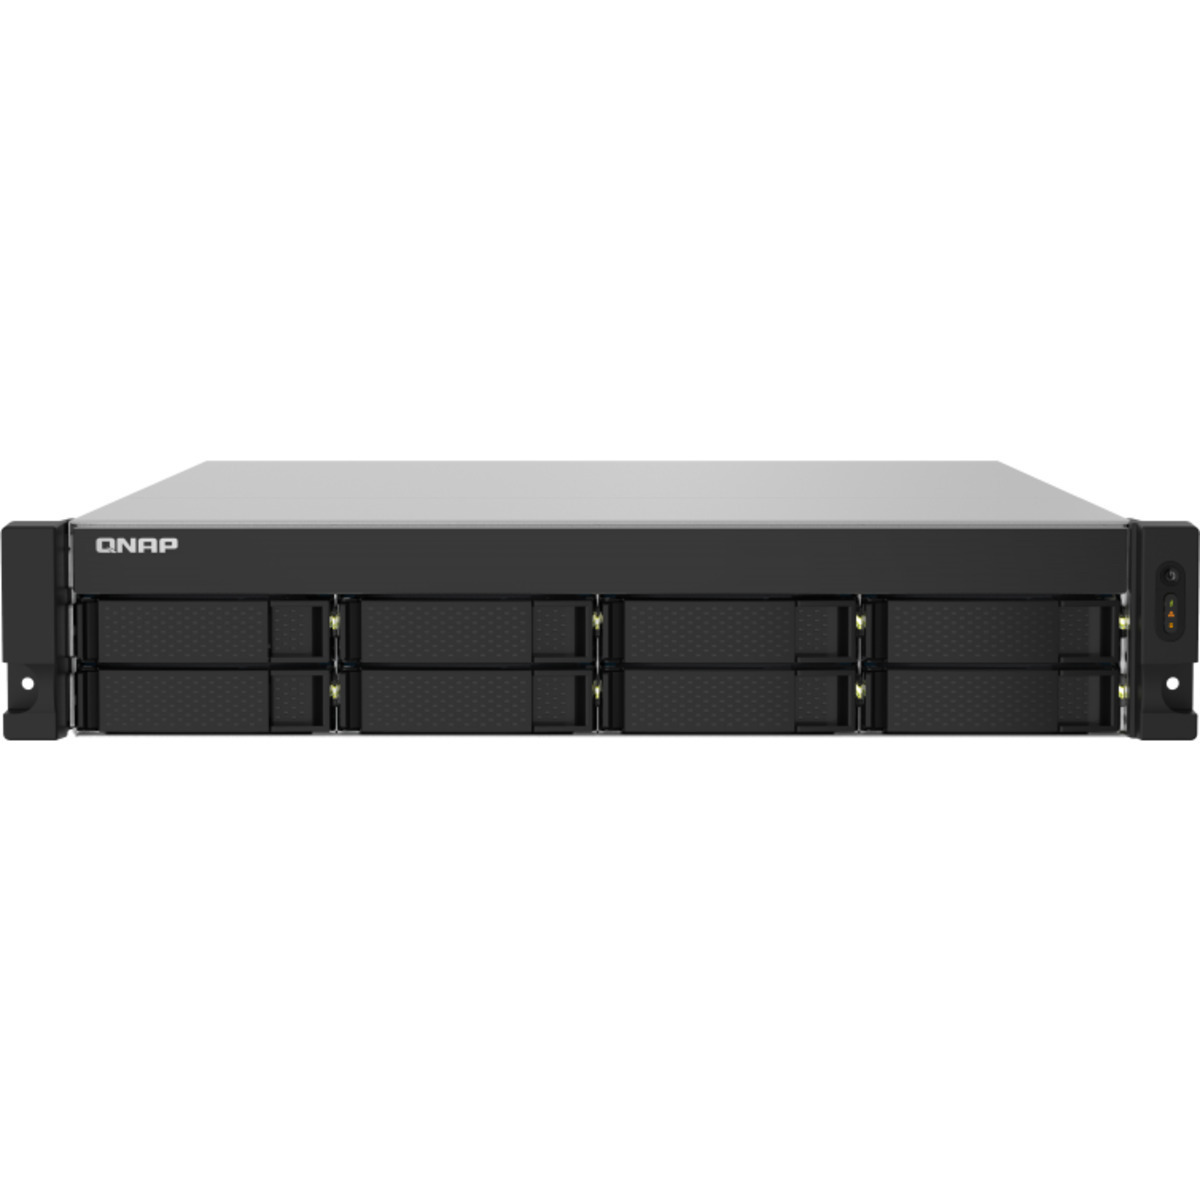 QNAP TS-832PXU 84tb 8-Bay RackMount Personal / Basic Home / Small Office NAS - Network Attached Storage Device 7x12tb Seagate IronWolf ST12000VN0008 3.5 7200rpm SATA 6Gb/s HDD NAS Class Drives Installed - Burn-In Tested - FREE RAM UPGRADE TS-832PXU